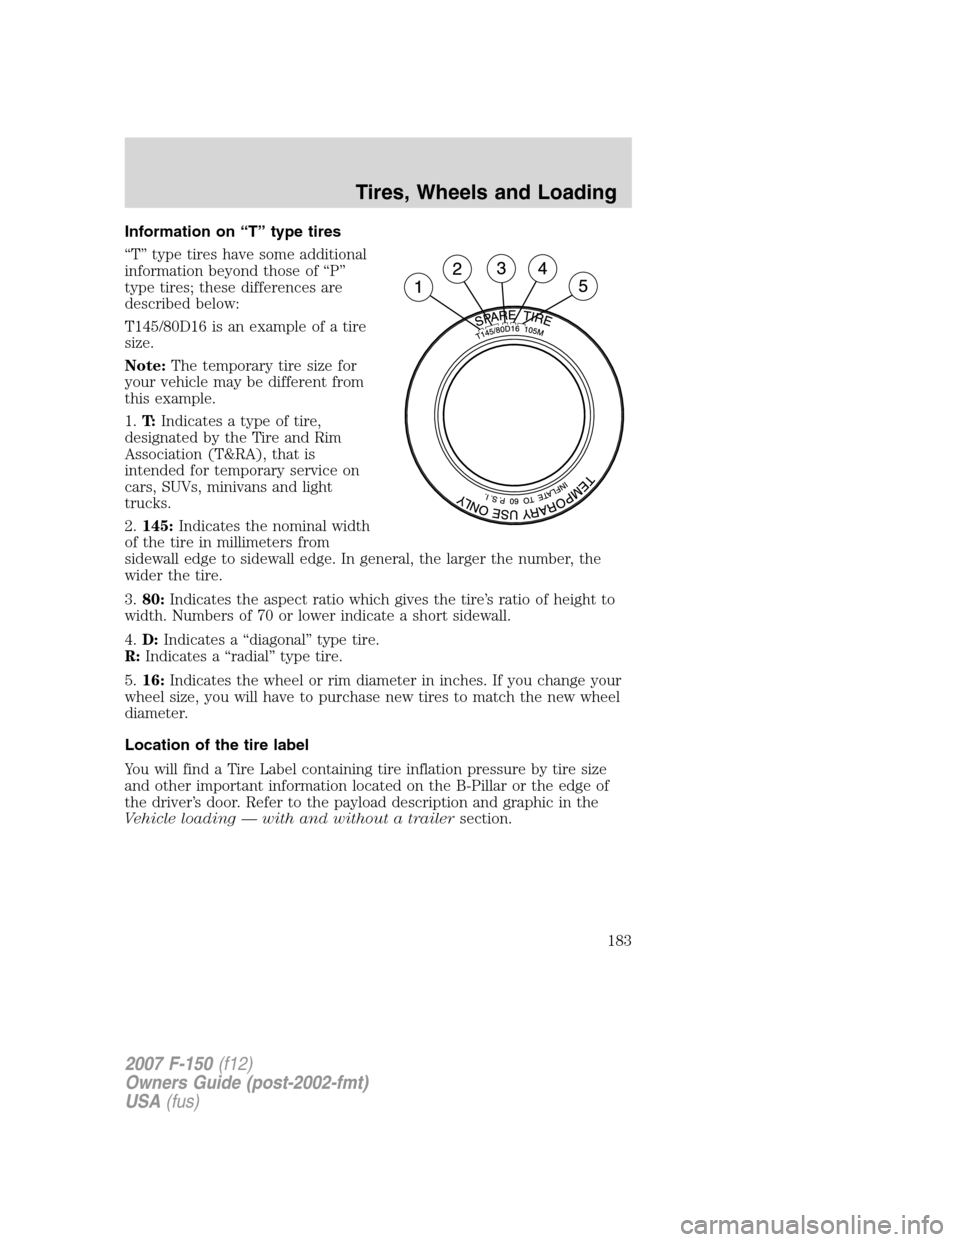 FORD F150 2007 11.G Owners Manual Information on “T” type tires
“T” type tires have some additional
information beyond those of “P”
type tires; these differences are
described below:
T145/80D16 is an example of a tire
size